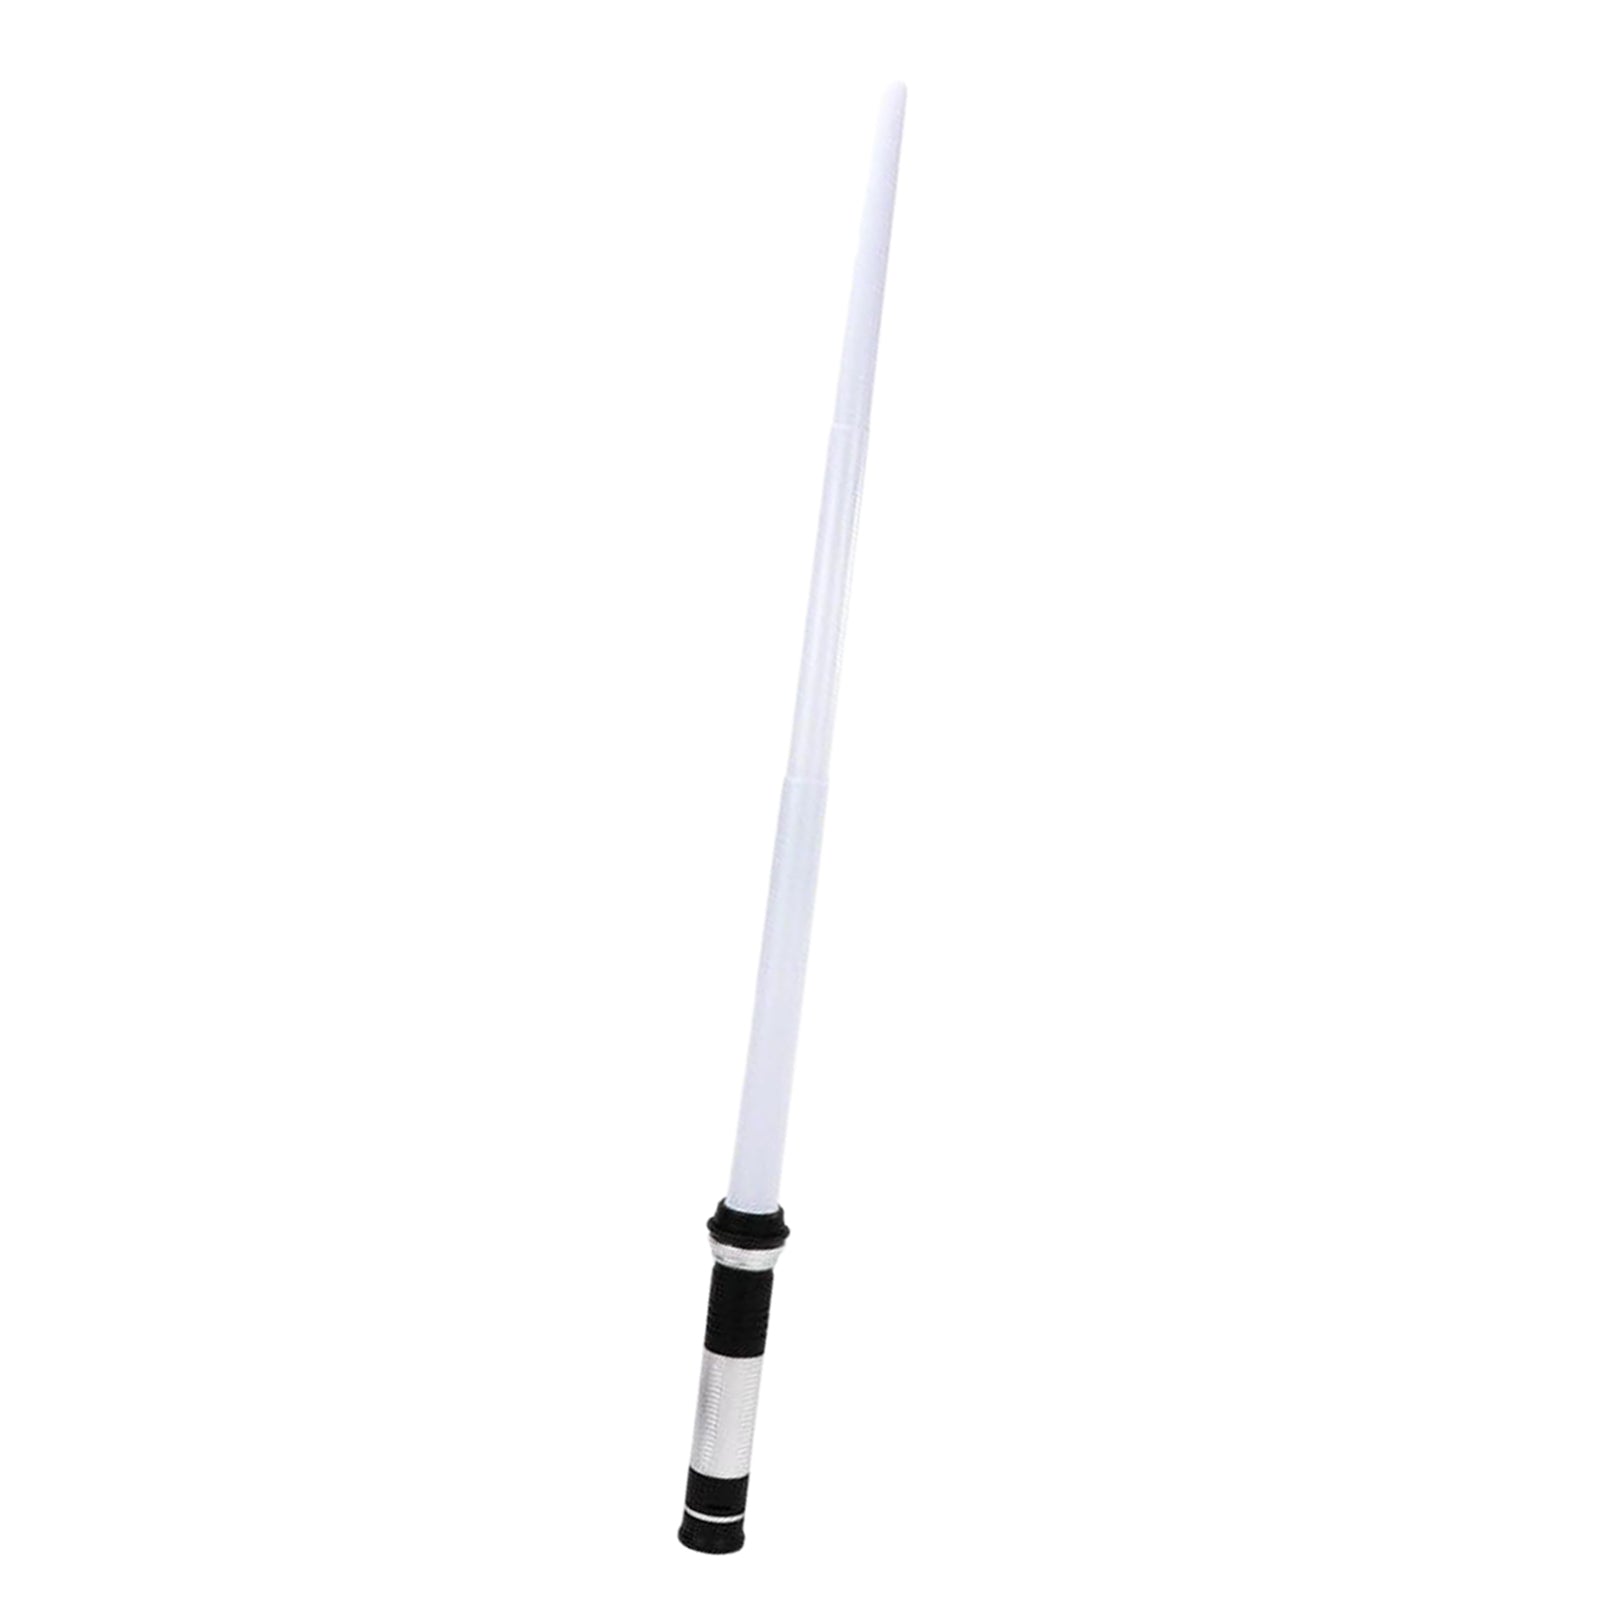 LED Light Up Sword with Sound Effects for Costume War Fighters Warriors Toy 1pcs